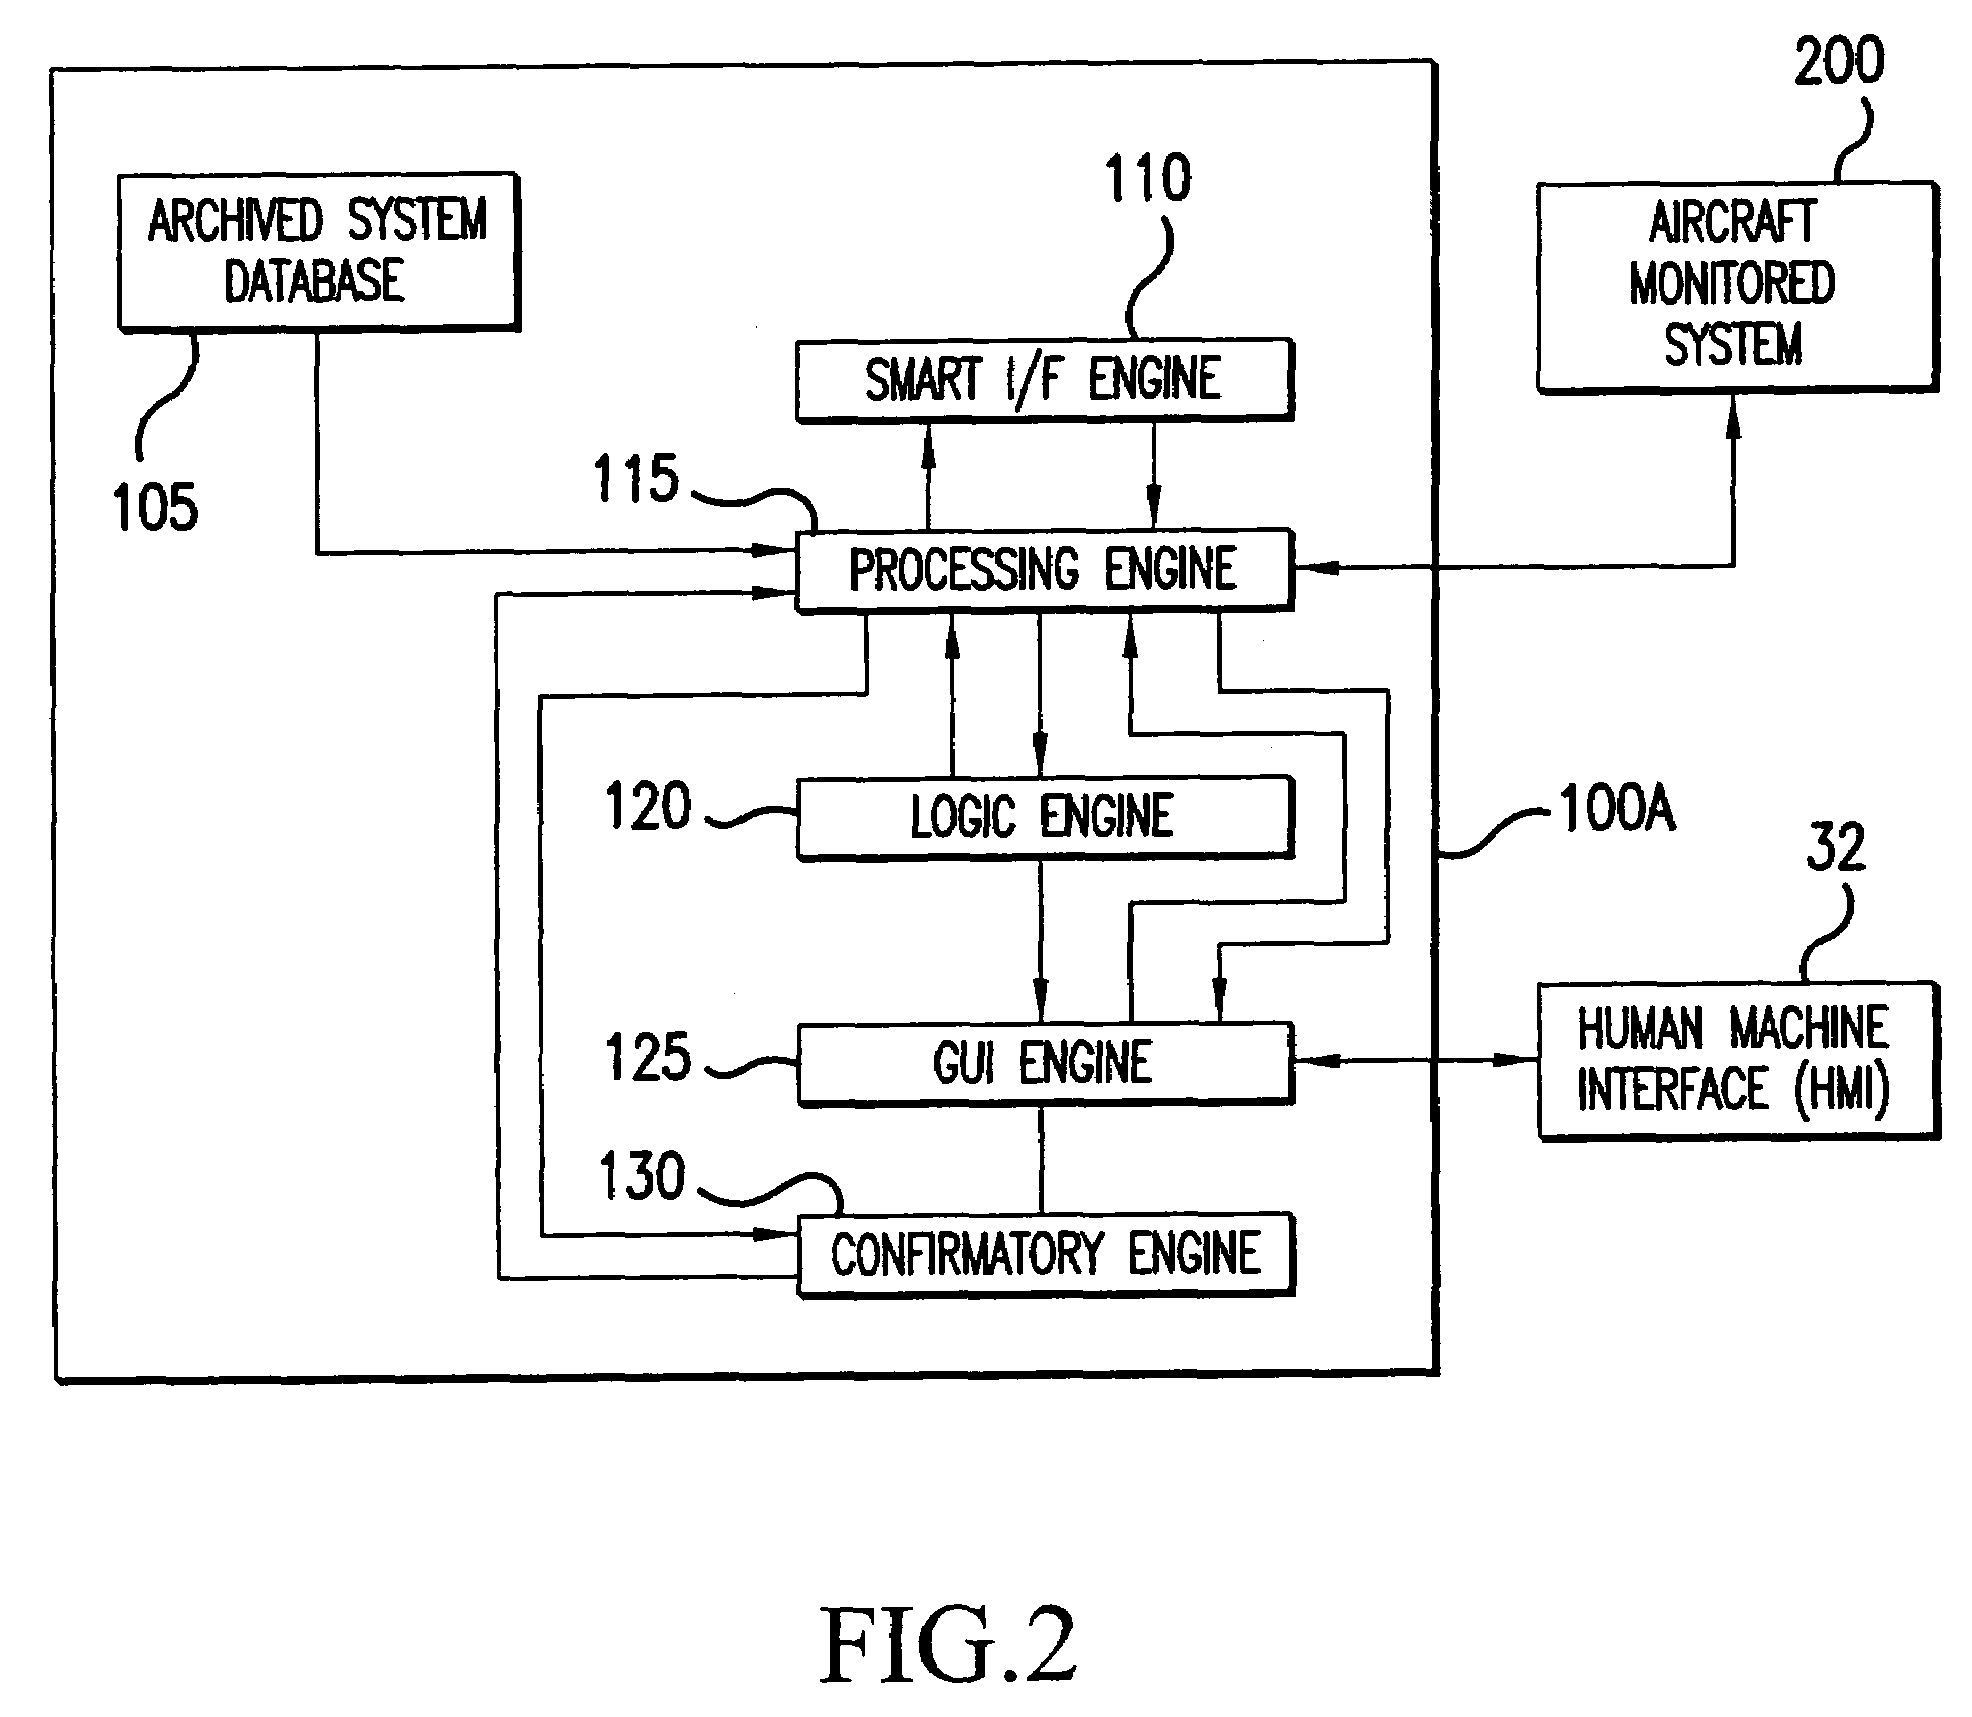 Method and apparatus for system monitoring and maintenance